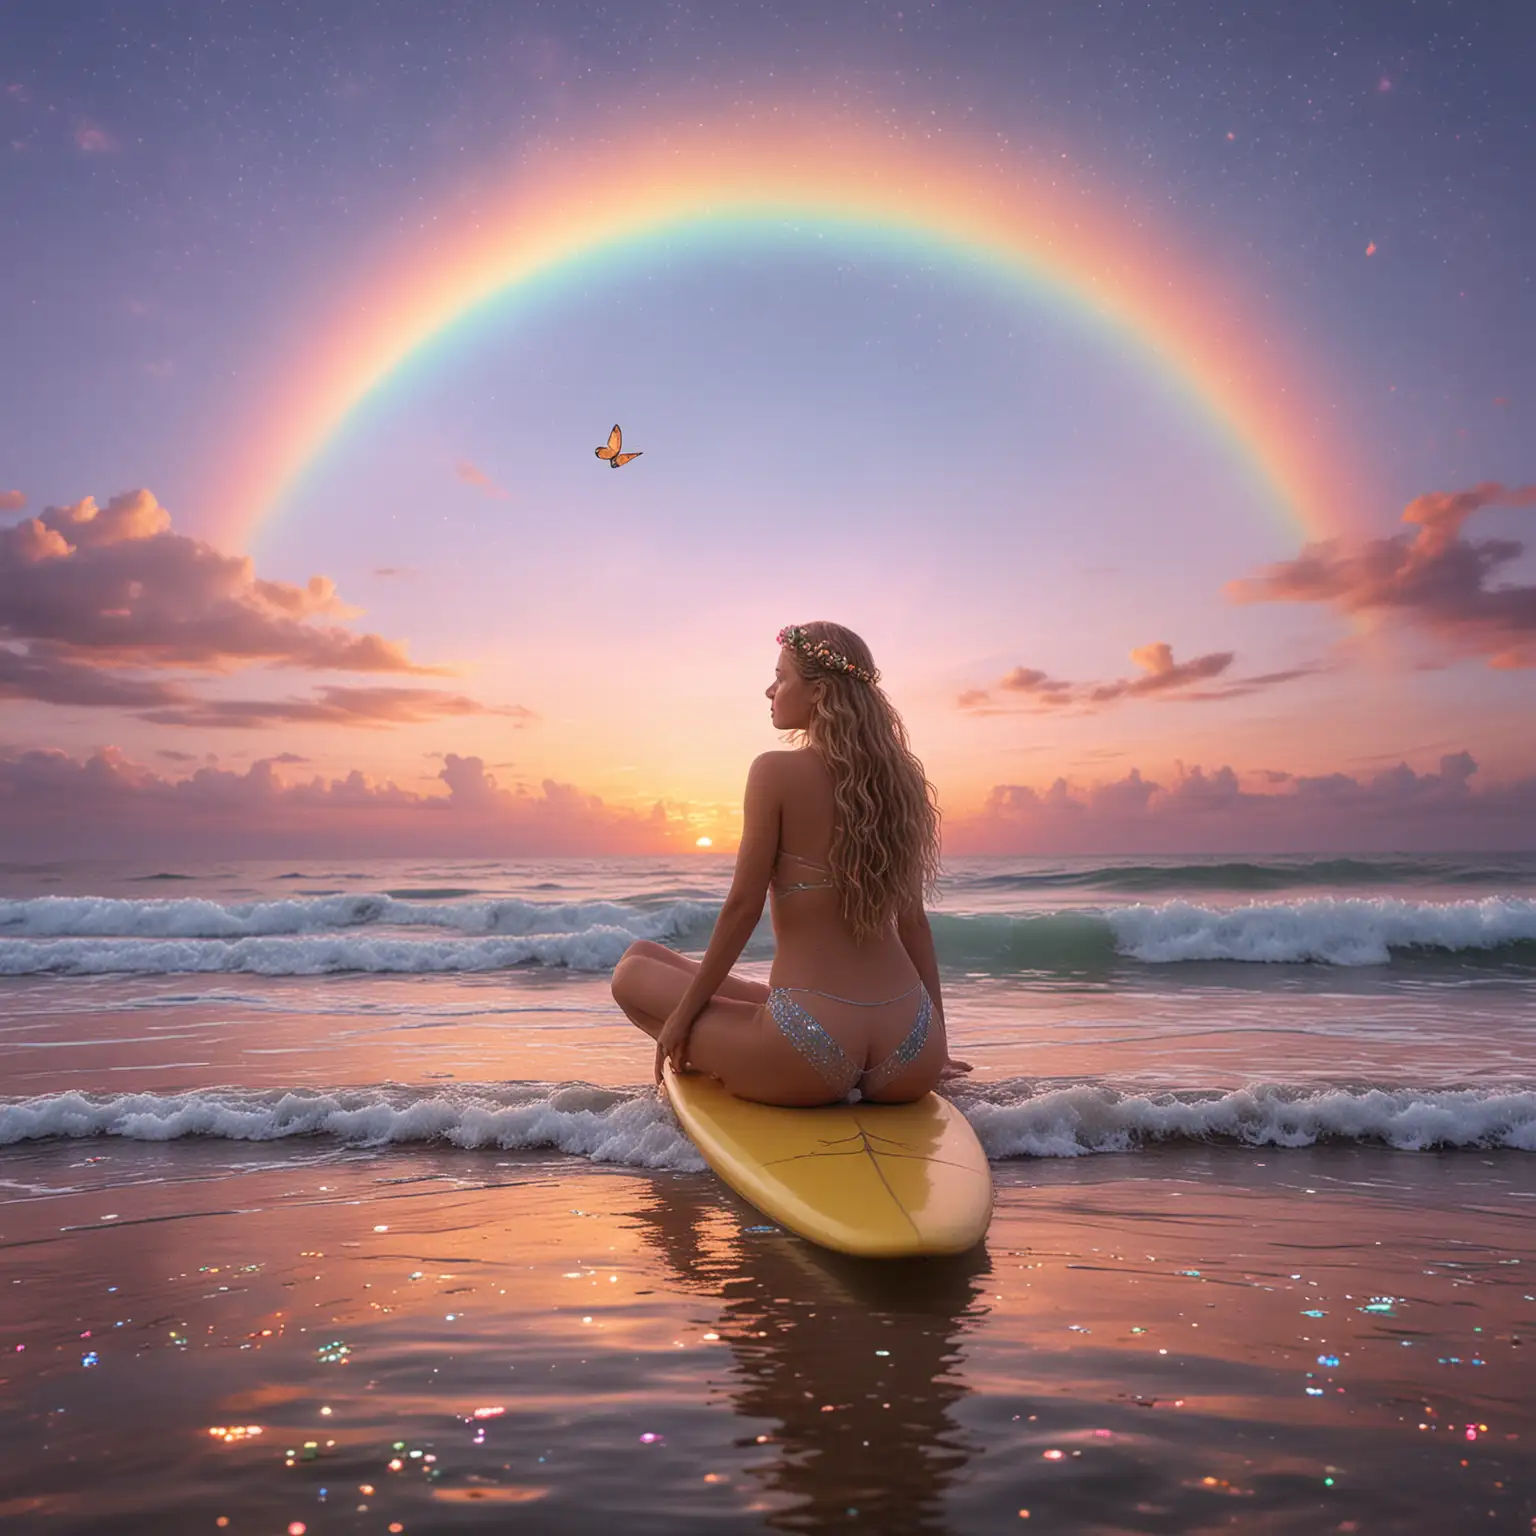 A goddess sitting on a surfboard, during a sunset, with a pastel rainbow sky background, Inspiring, blissful, transcendent, magical imagery in bright rainbow pastel colors,  sparkles, rainbows, butterflies flying around, evoking the imagery of waiting for a dream that is on its way to you